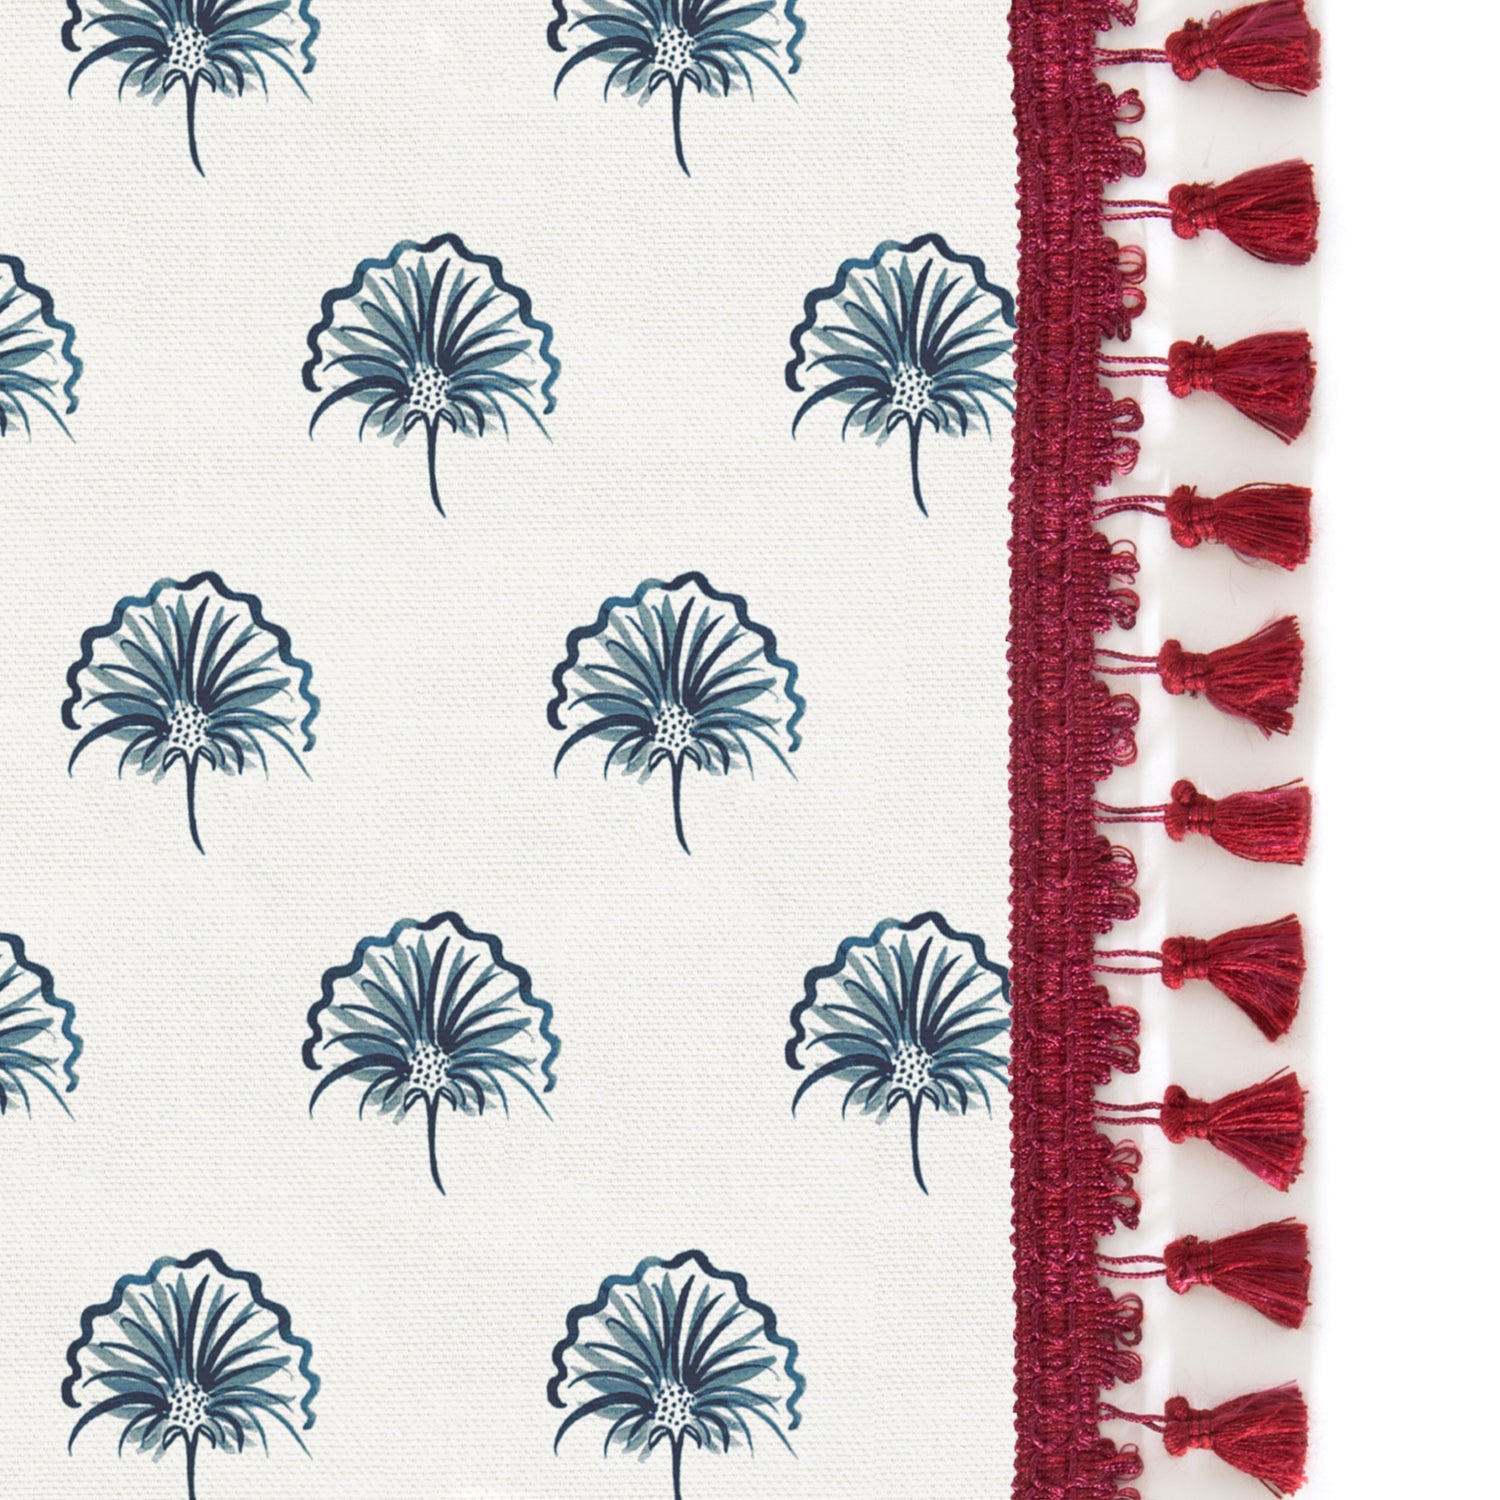 Upclose picture of Penelope Midnight custom Floral Navyshower curtain with midnight raspberry tassel trim